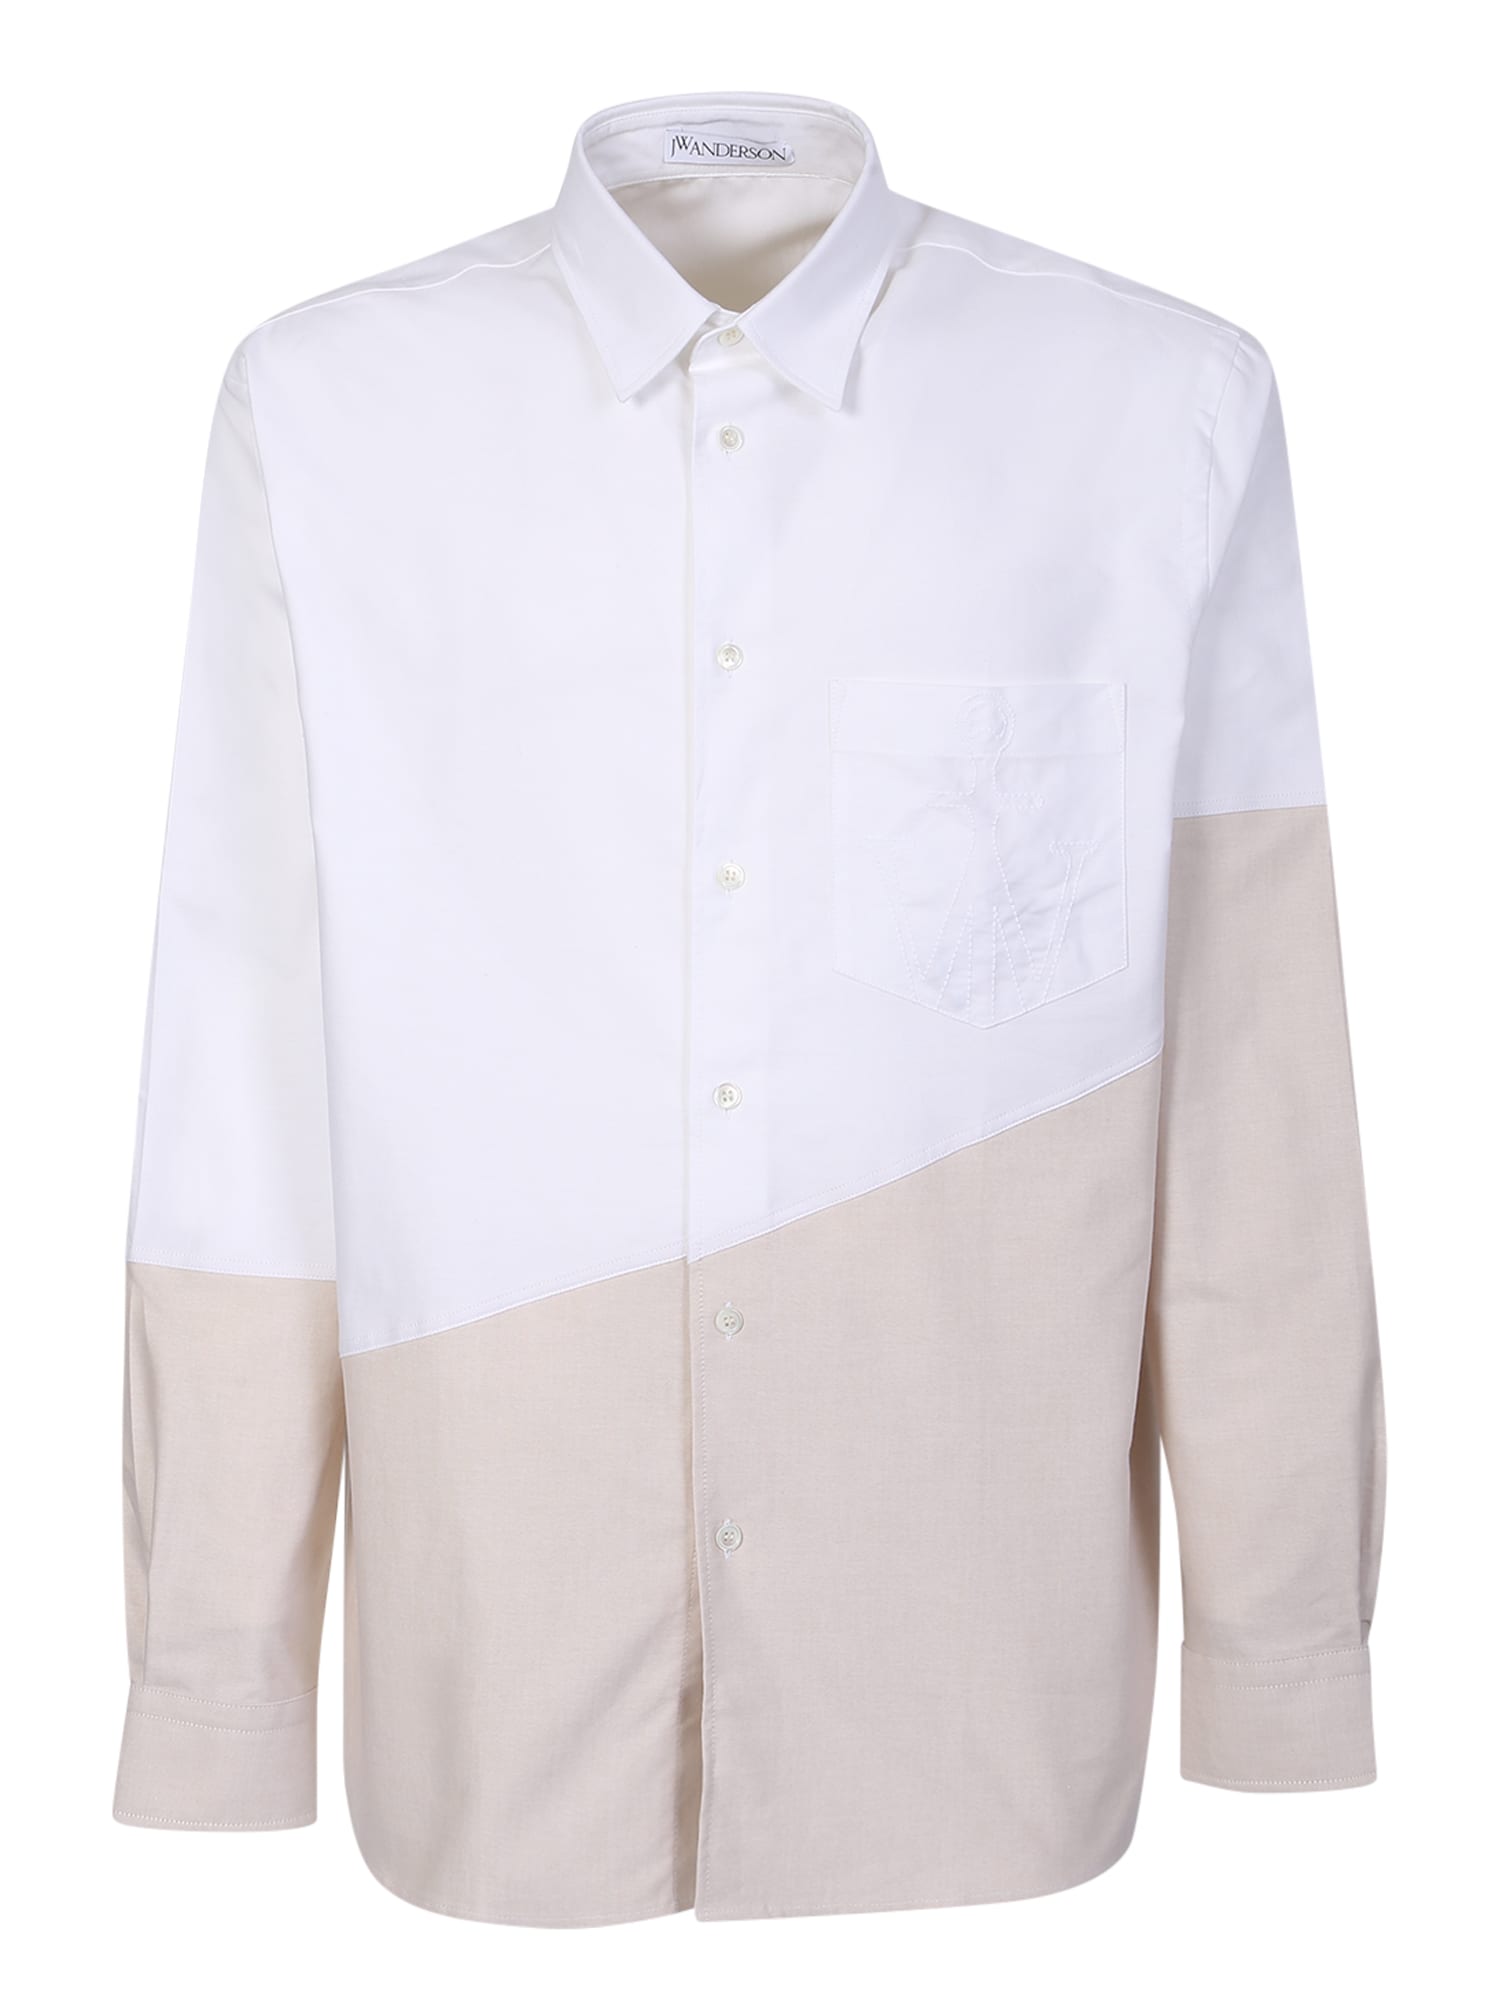 JW ANDERSON TWO-TONE SHIRT